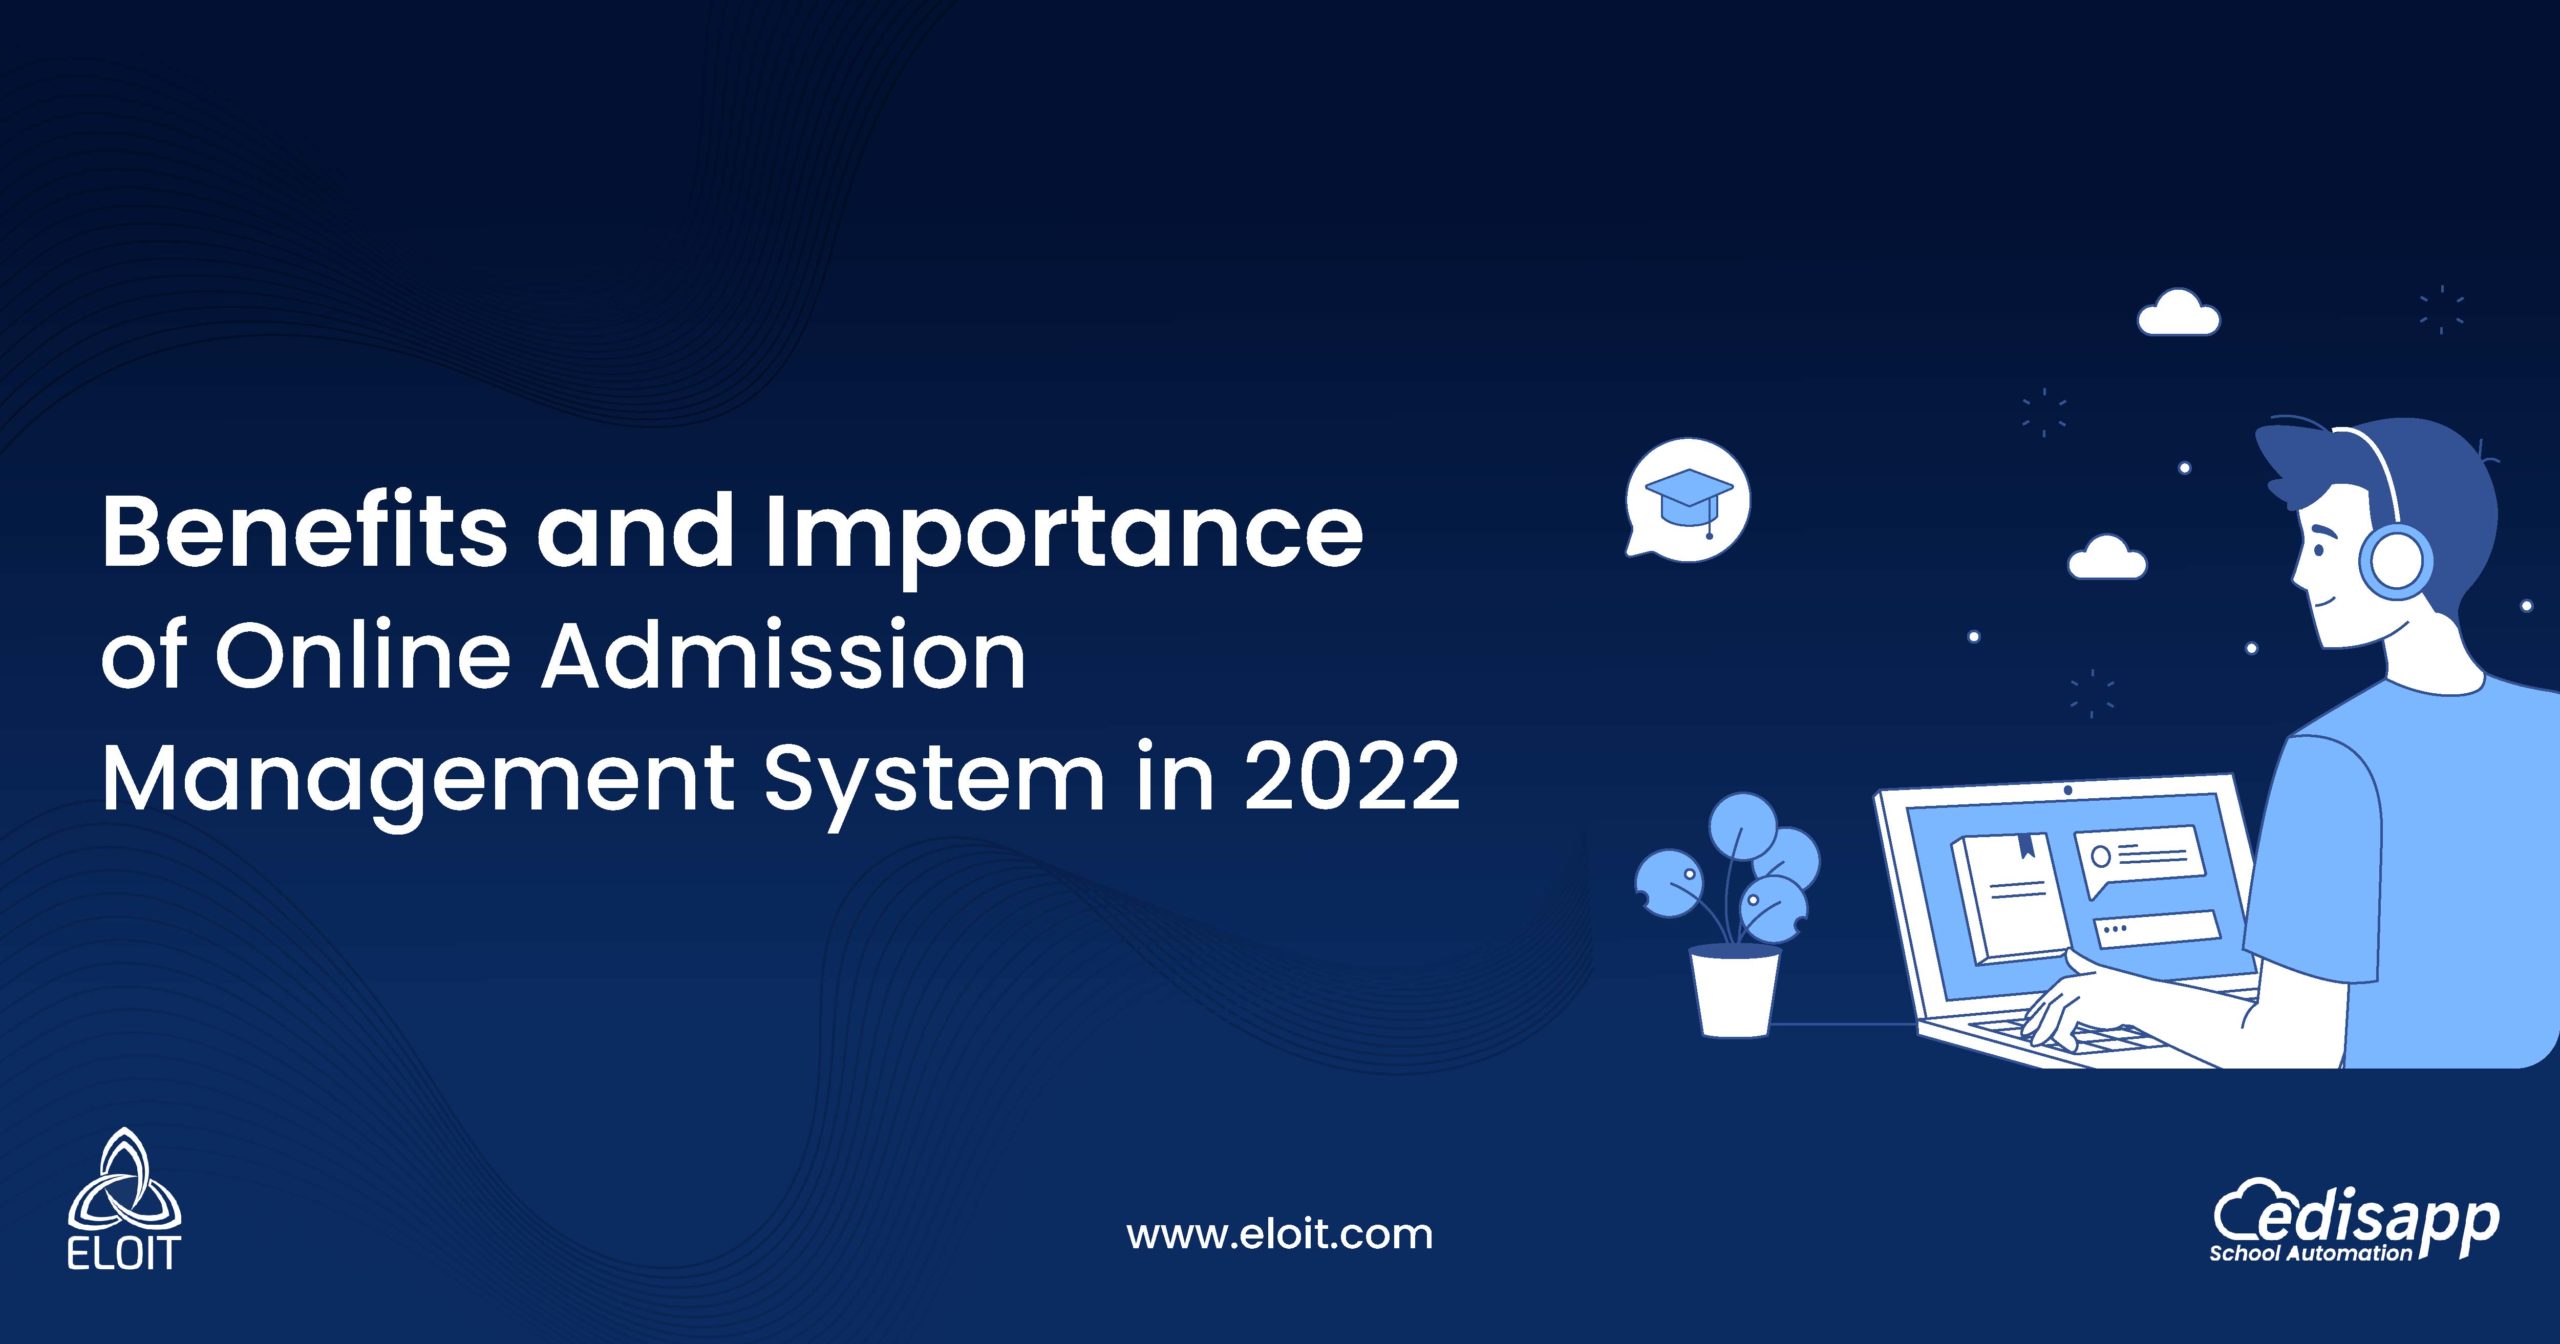 Benefits and Importance of Online Admission Management System in 2022